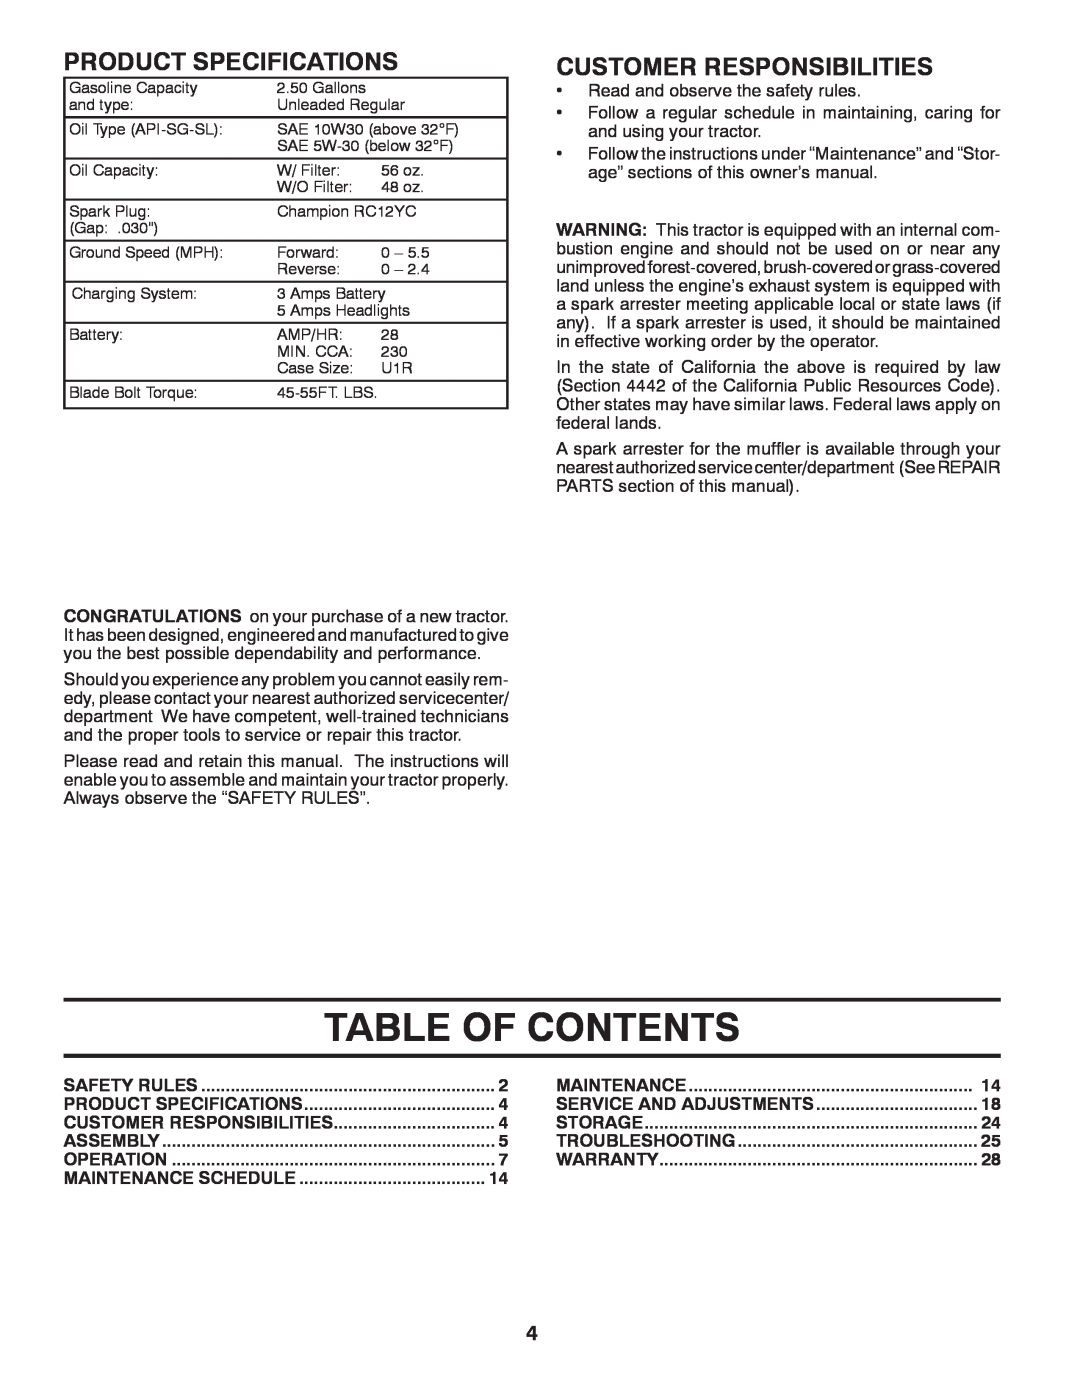 Poulan 412412 manual Table Of Contents, Product Specifications, Customer Responsibilities 